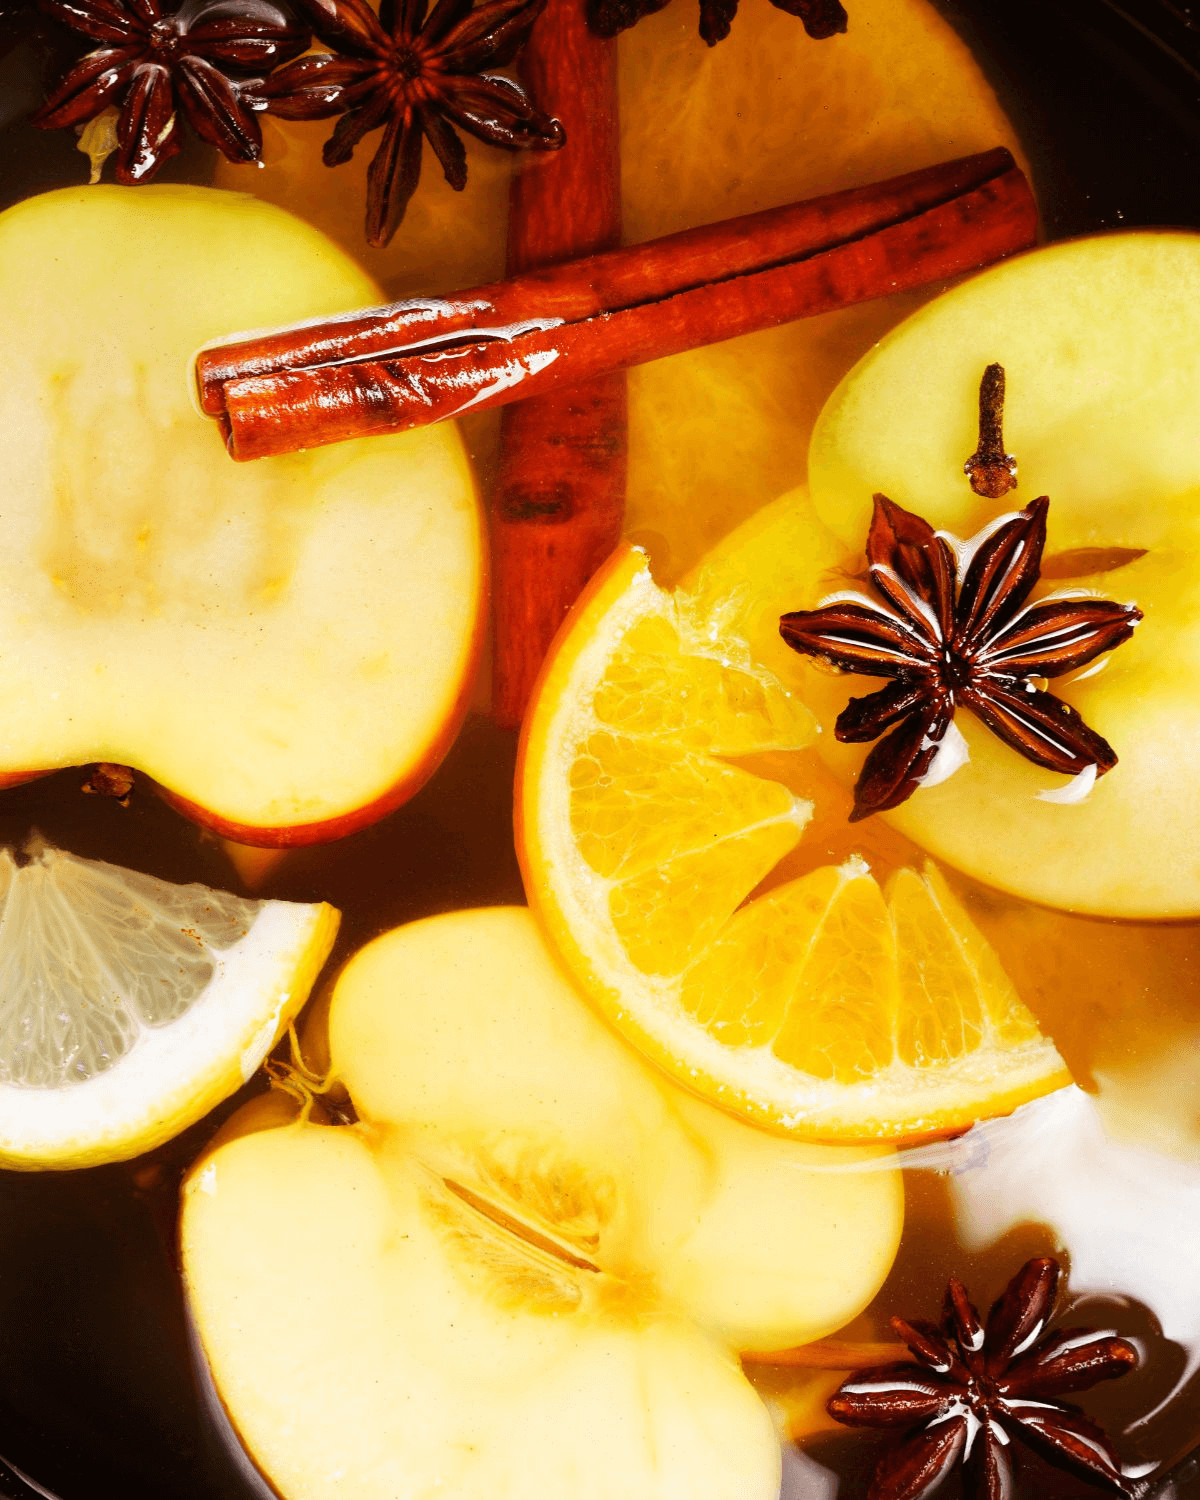 A close up on the sliced fruit in the beverage.